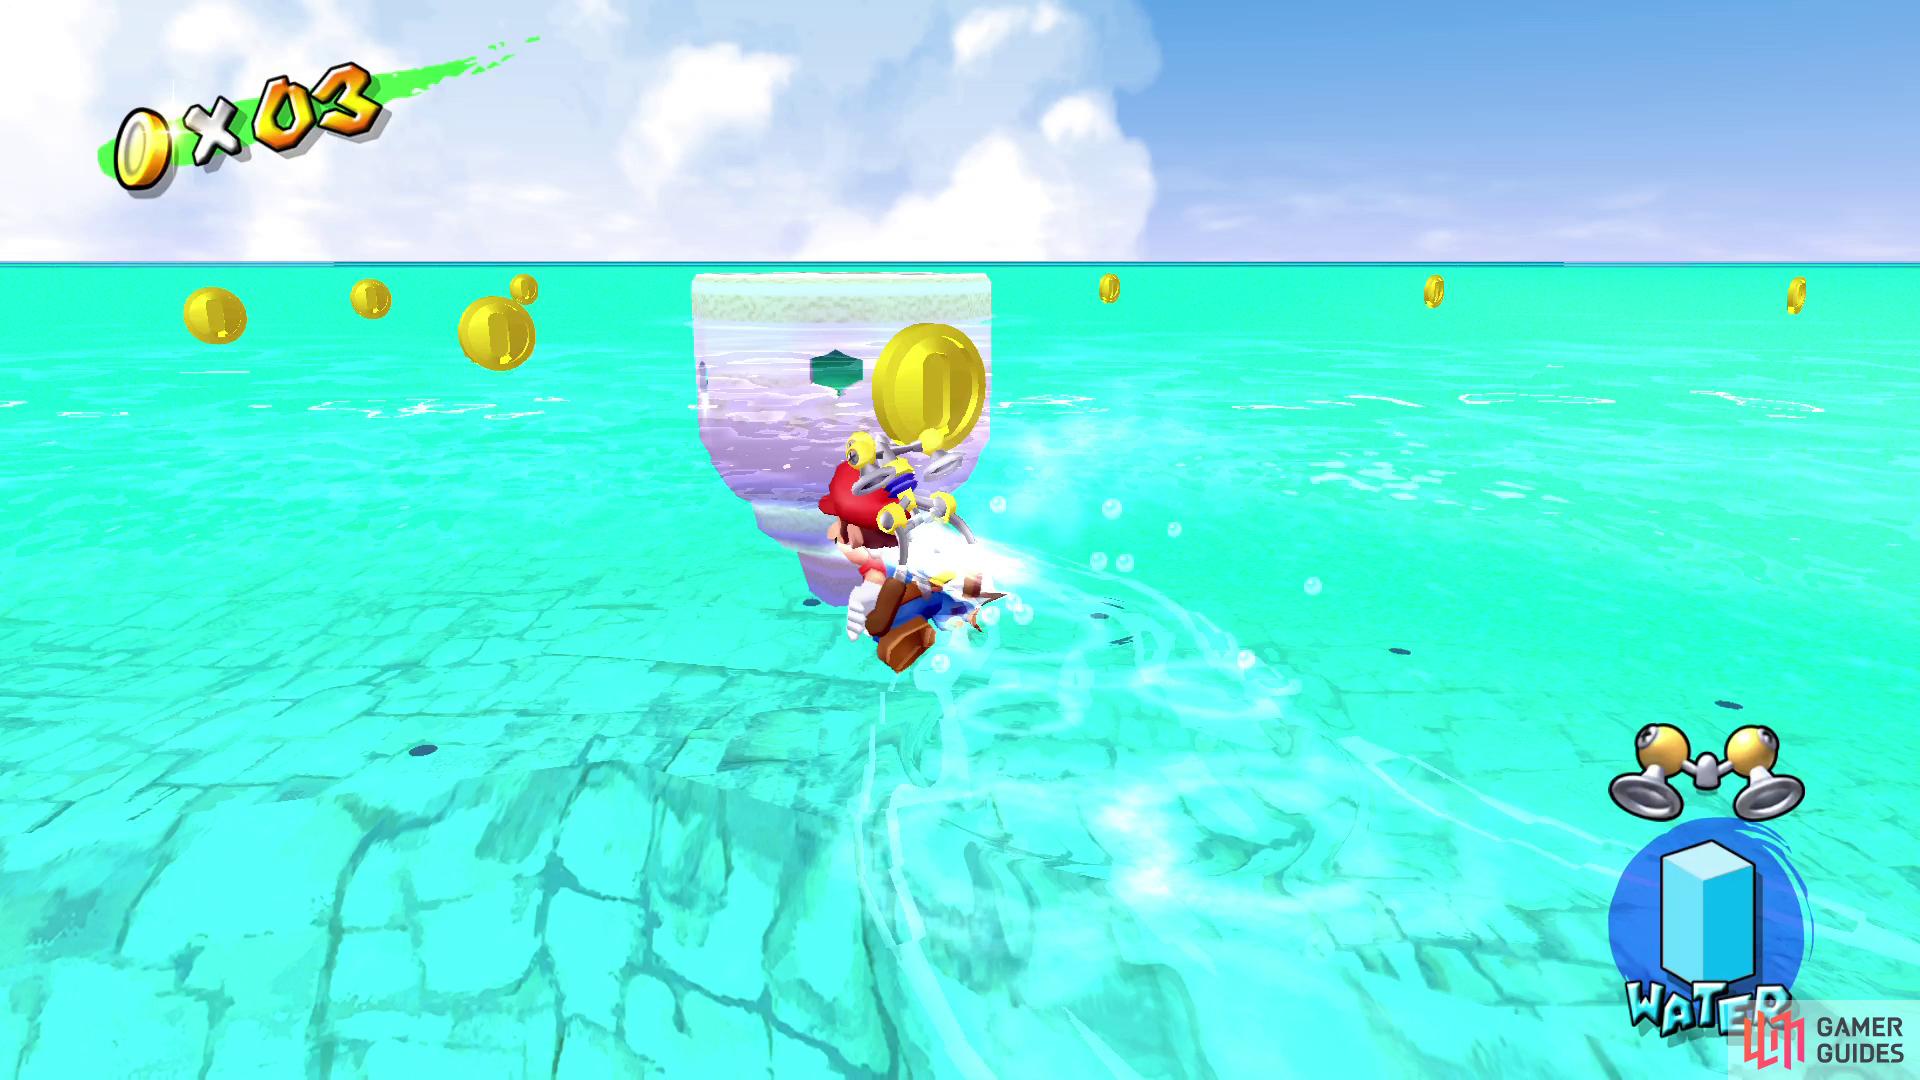 Follow the trail of coins in the sea to collect 50 Coins